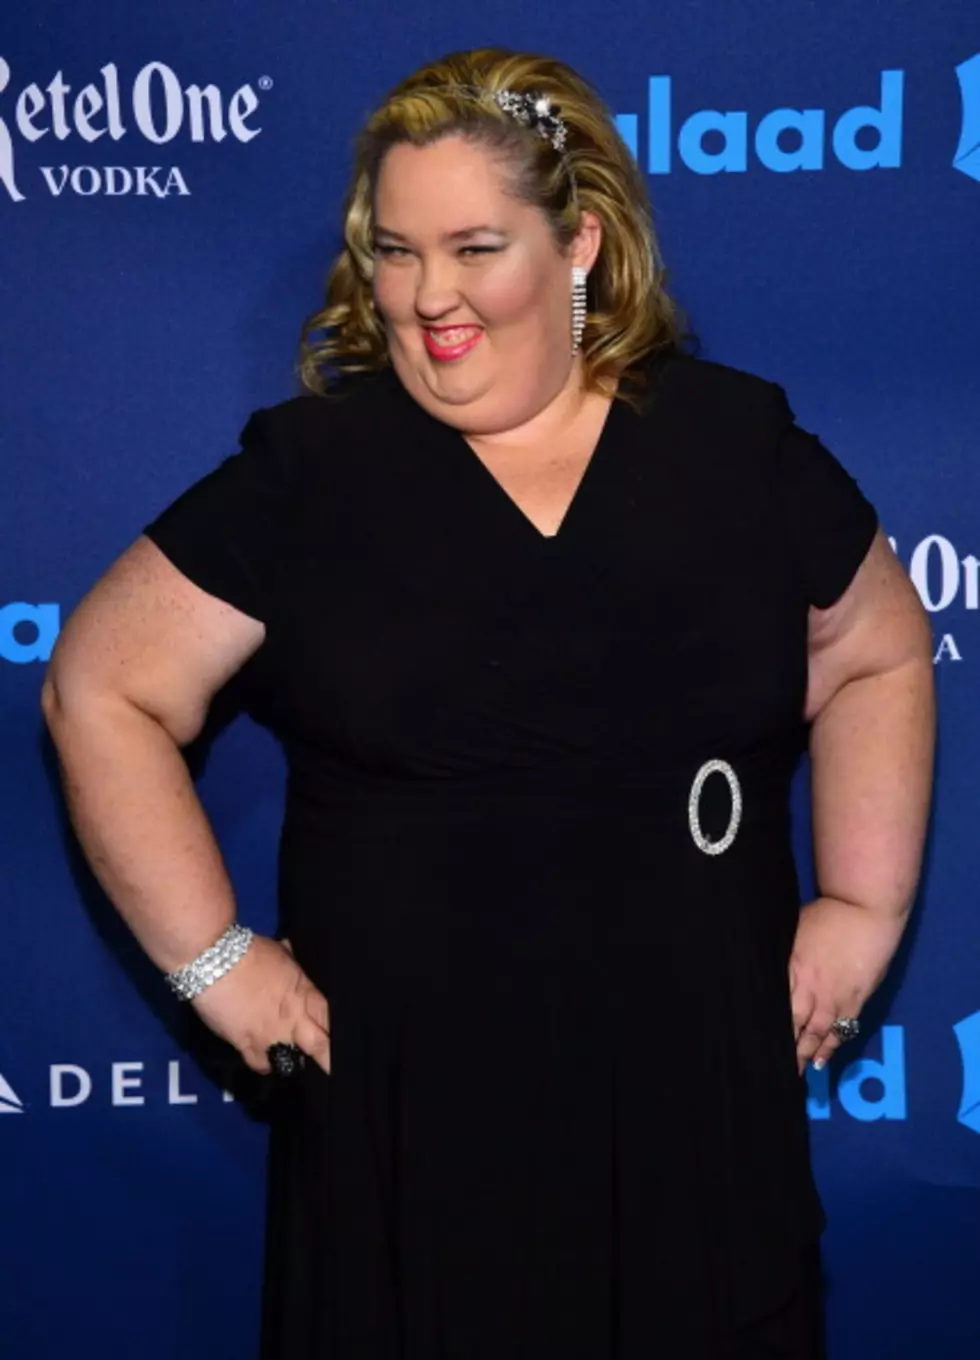 Big Weight Loss for Honey Boo Boo’s Mama June